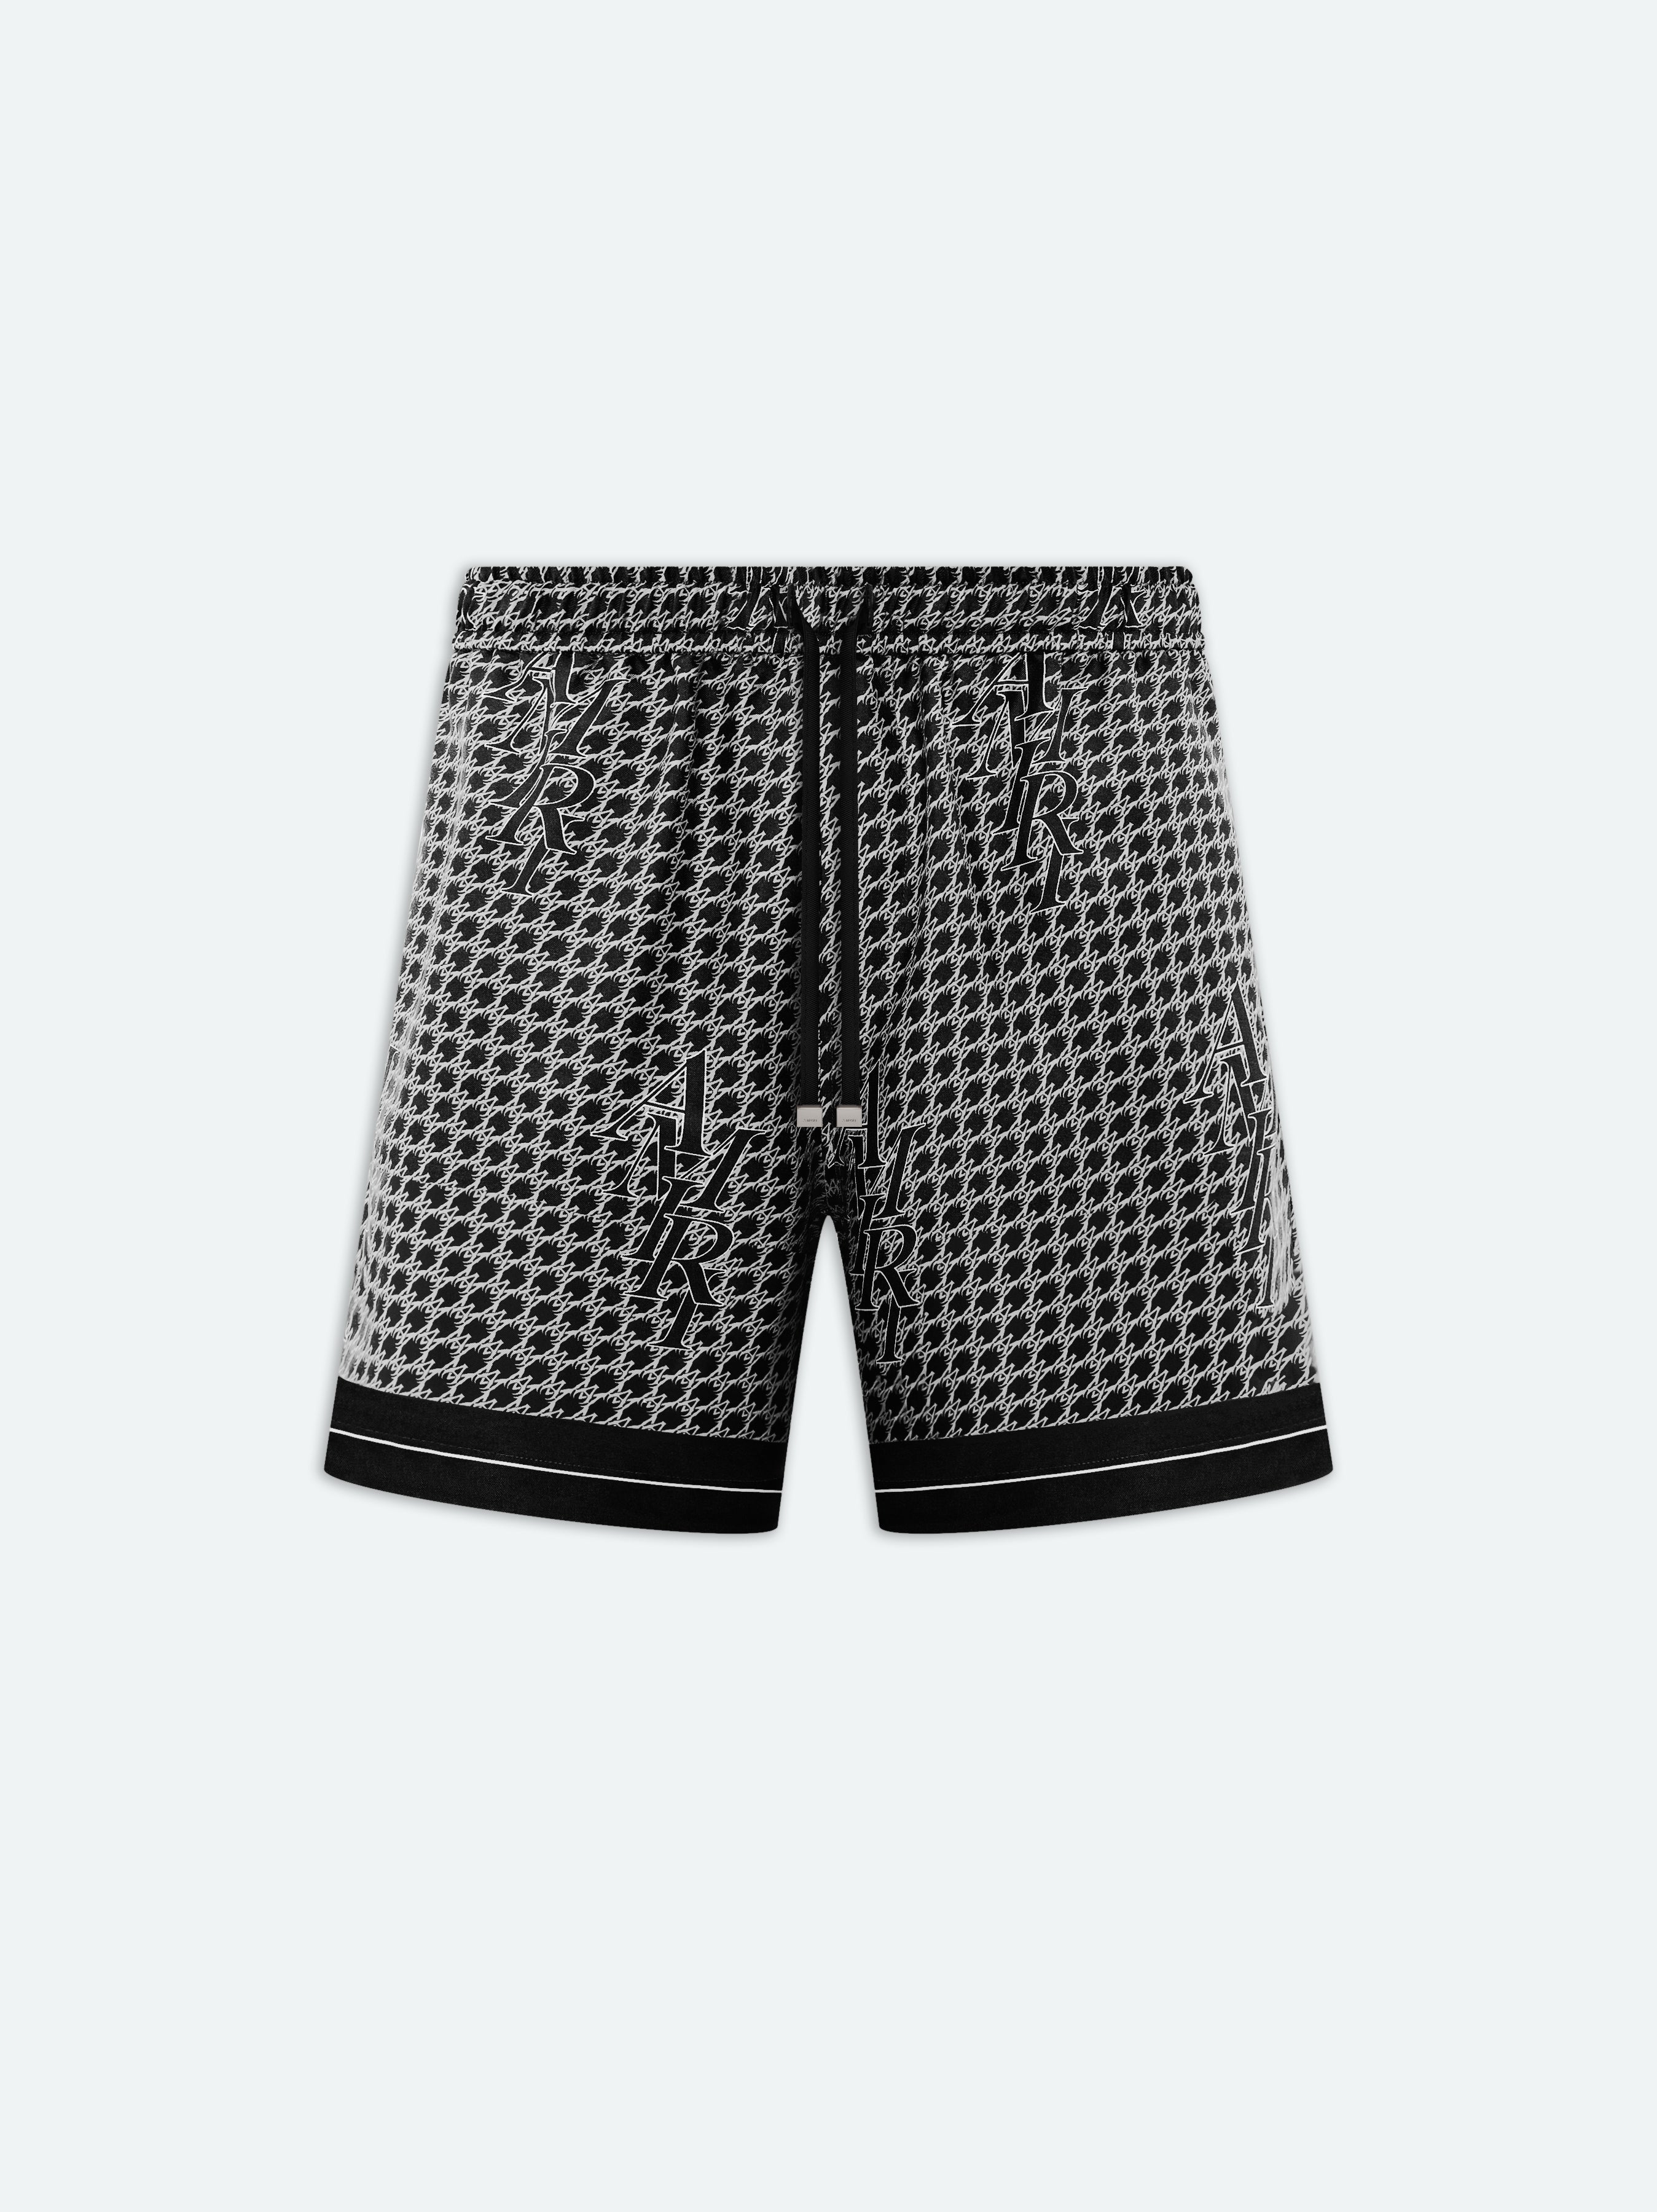 Product STAGGERED AMIRI HOUNDSTOOTH SILK SHORT - BLACK-SILK featured image